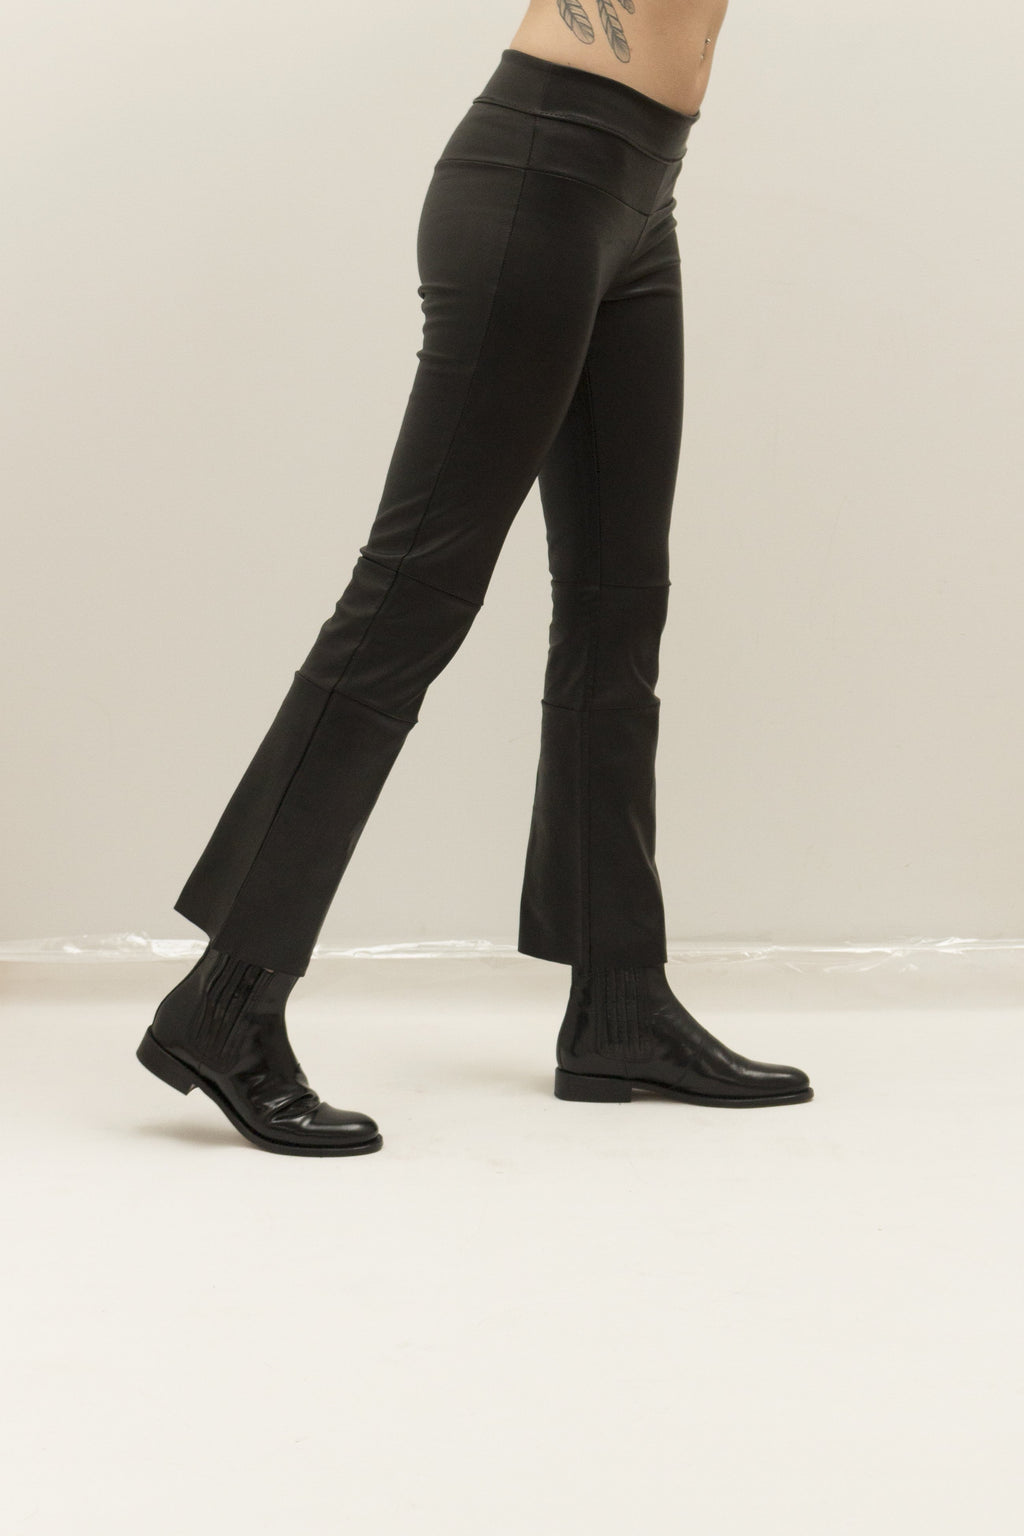 Custom Length for your Leather Leggings and Cropped Bootleggings.